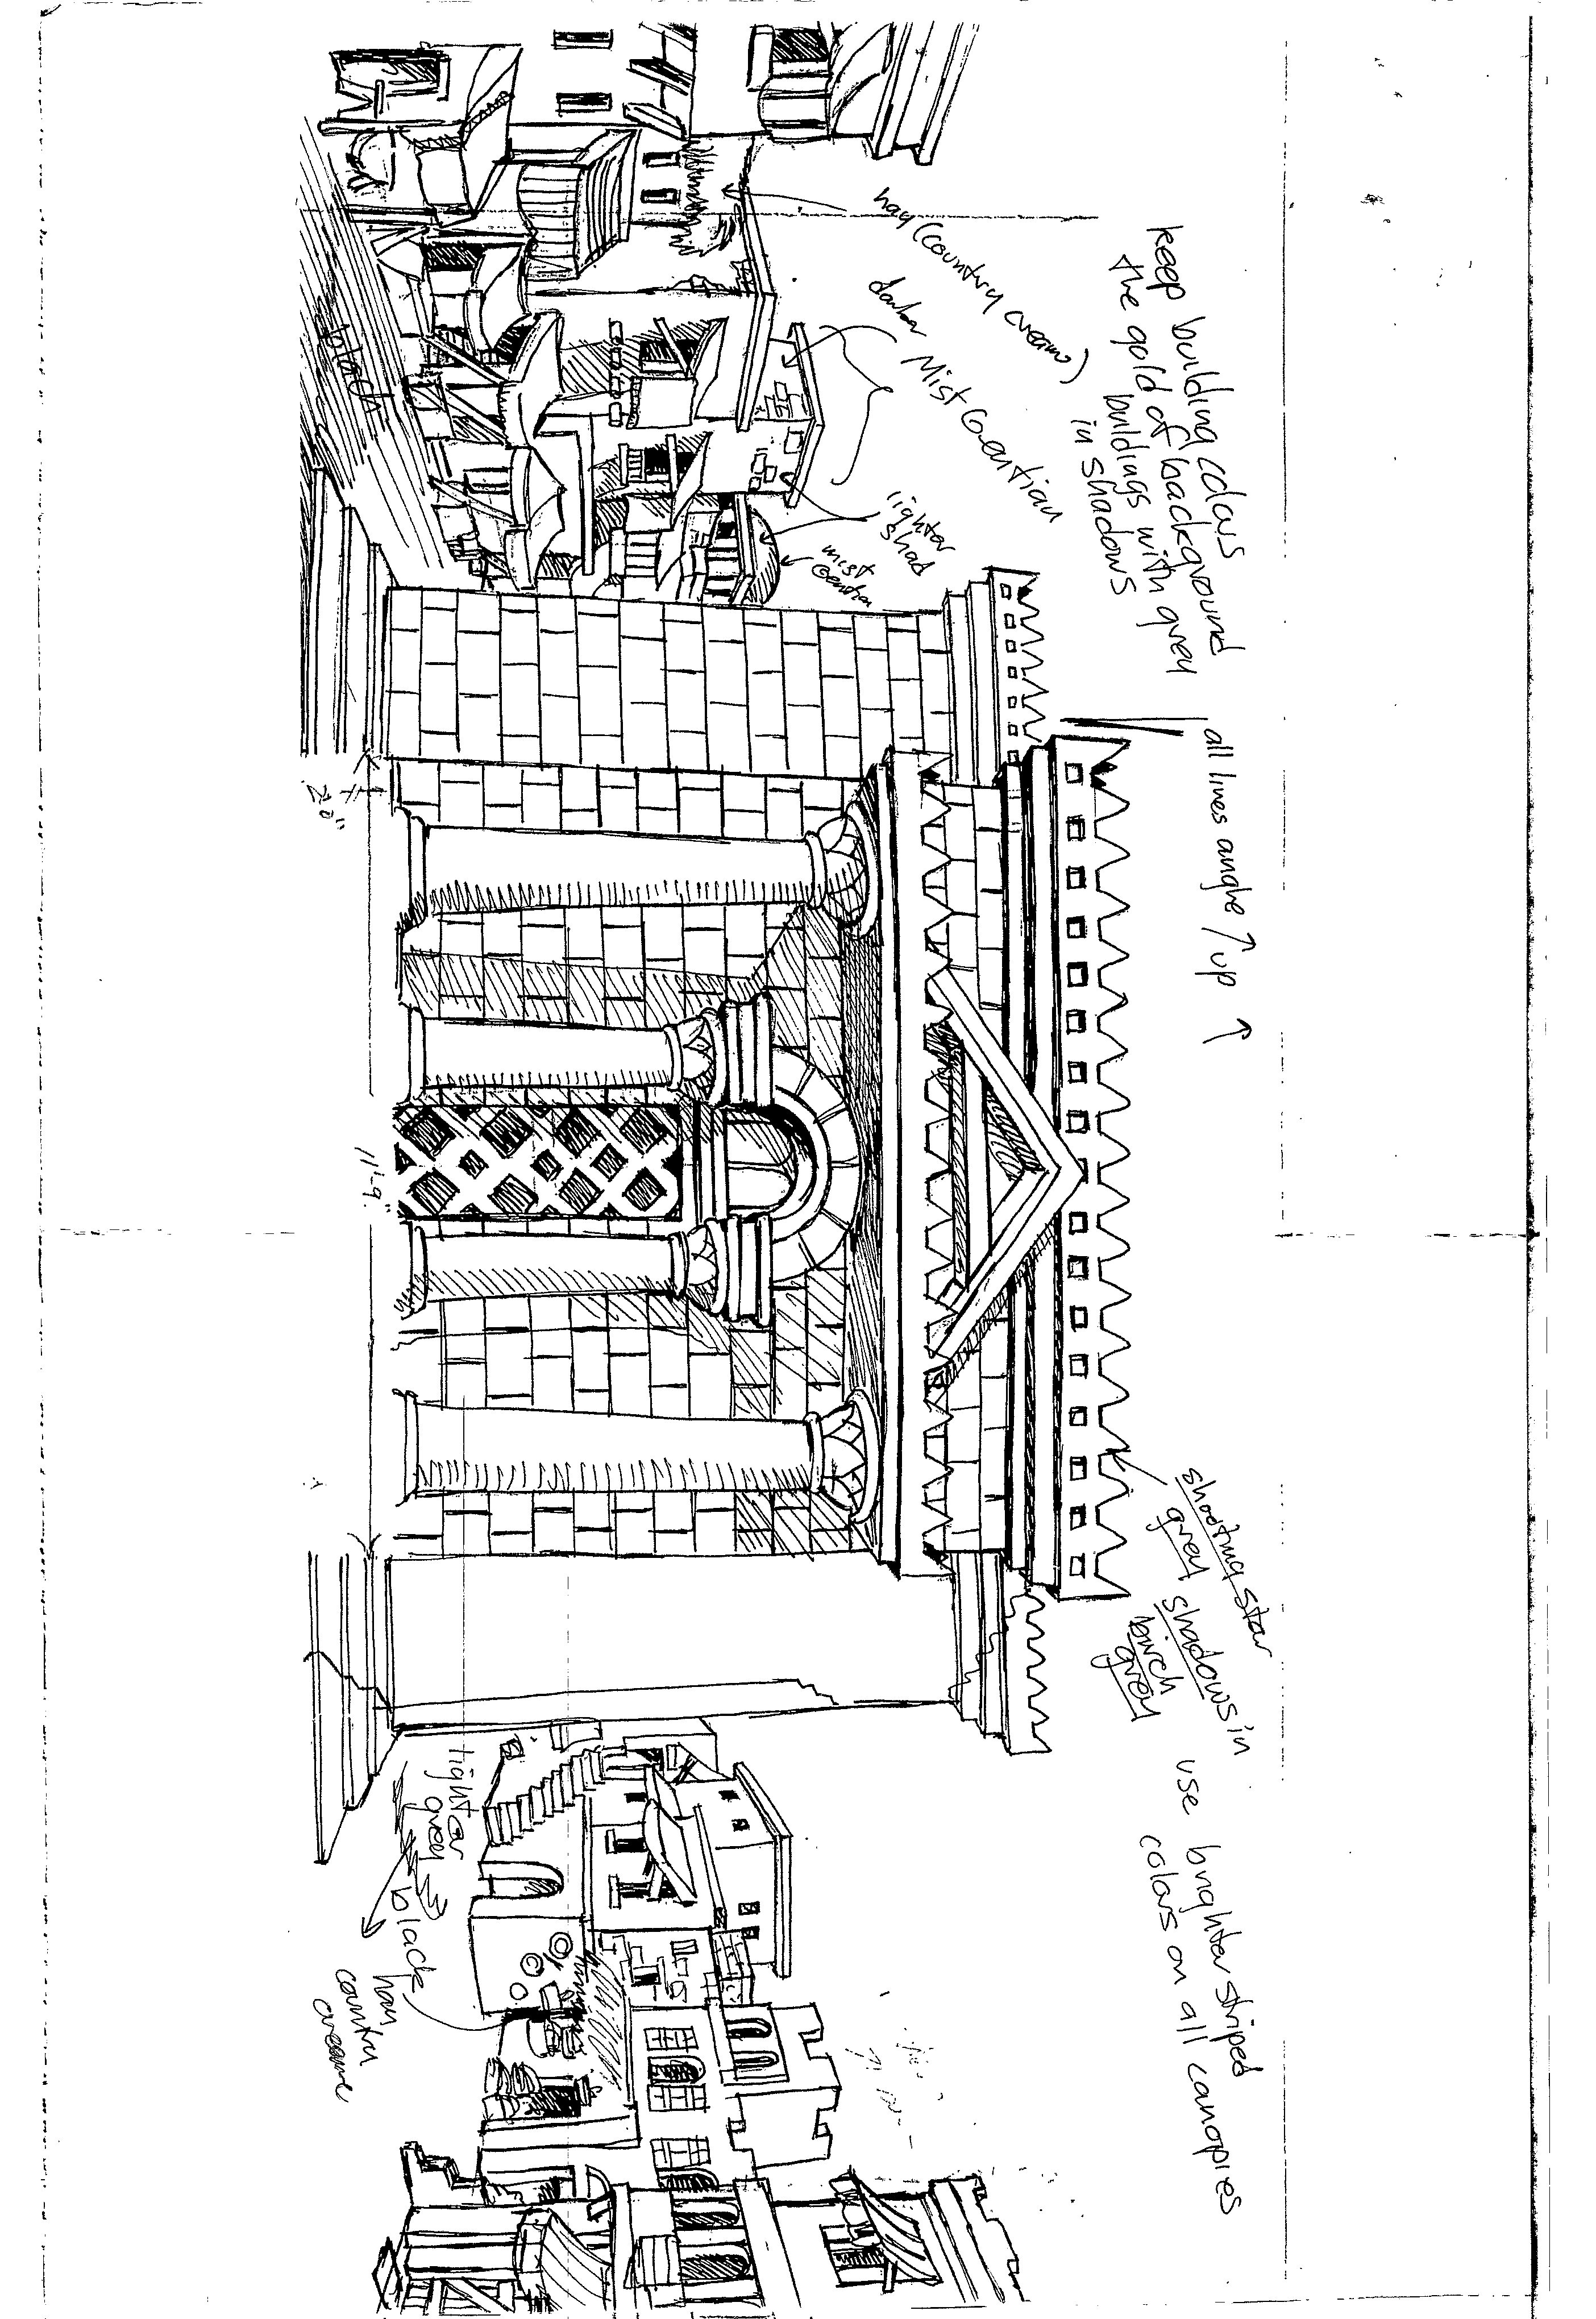 Design of The Temple